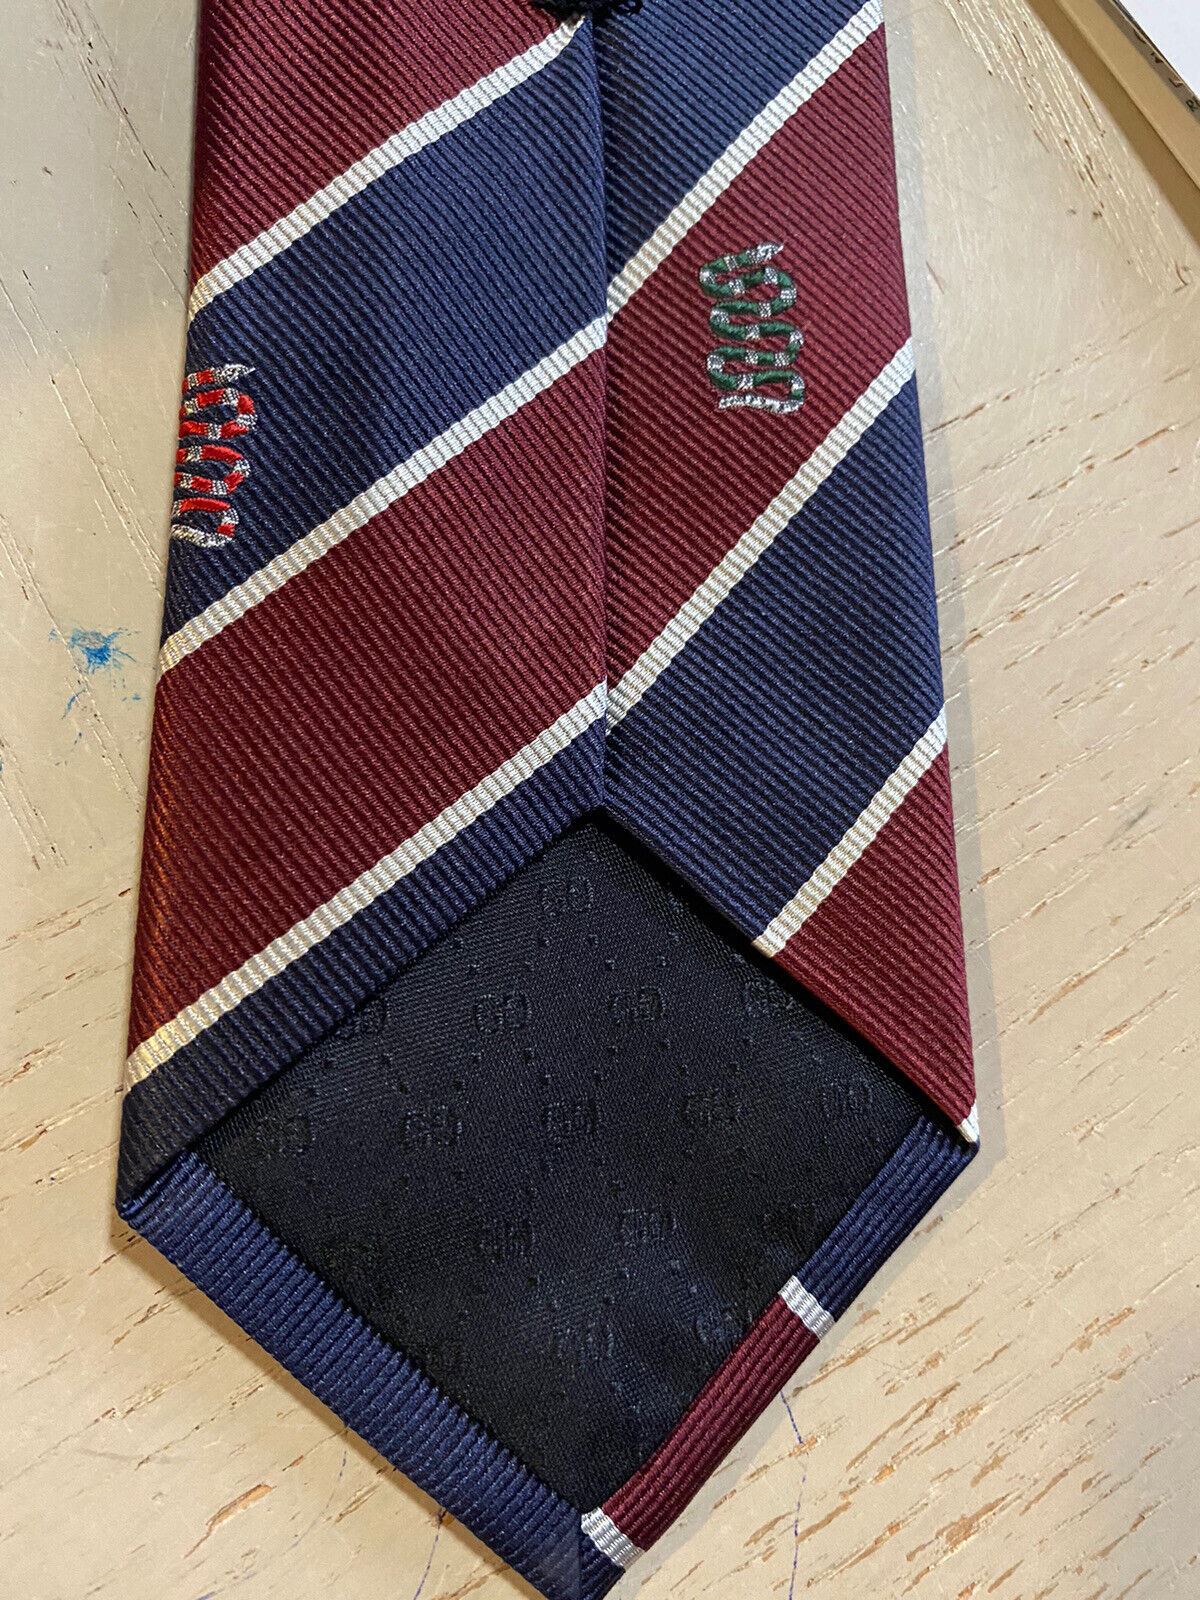 New Gucci Mens GG /Bee/Snake Printed Silk  Neck Tie Navy/Burgundy Italy